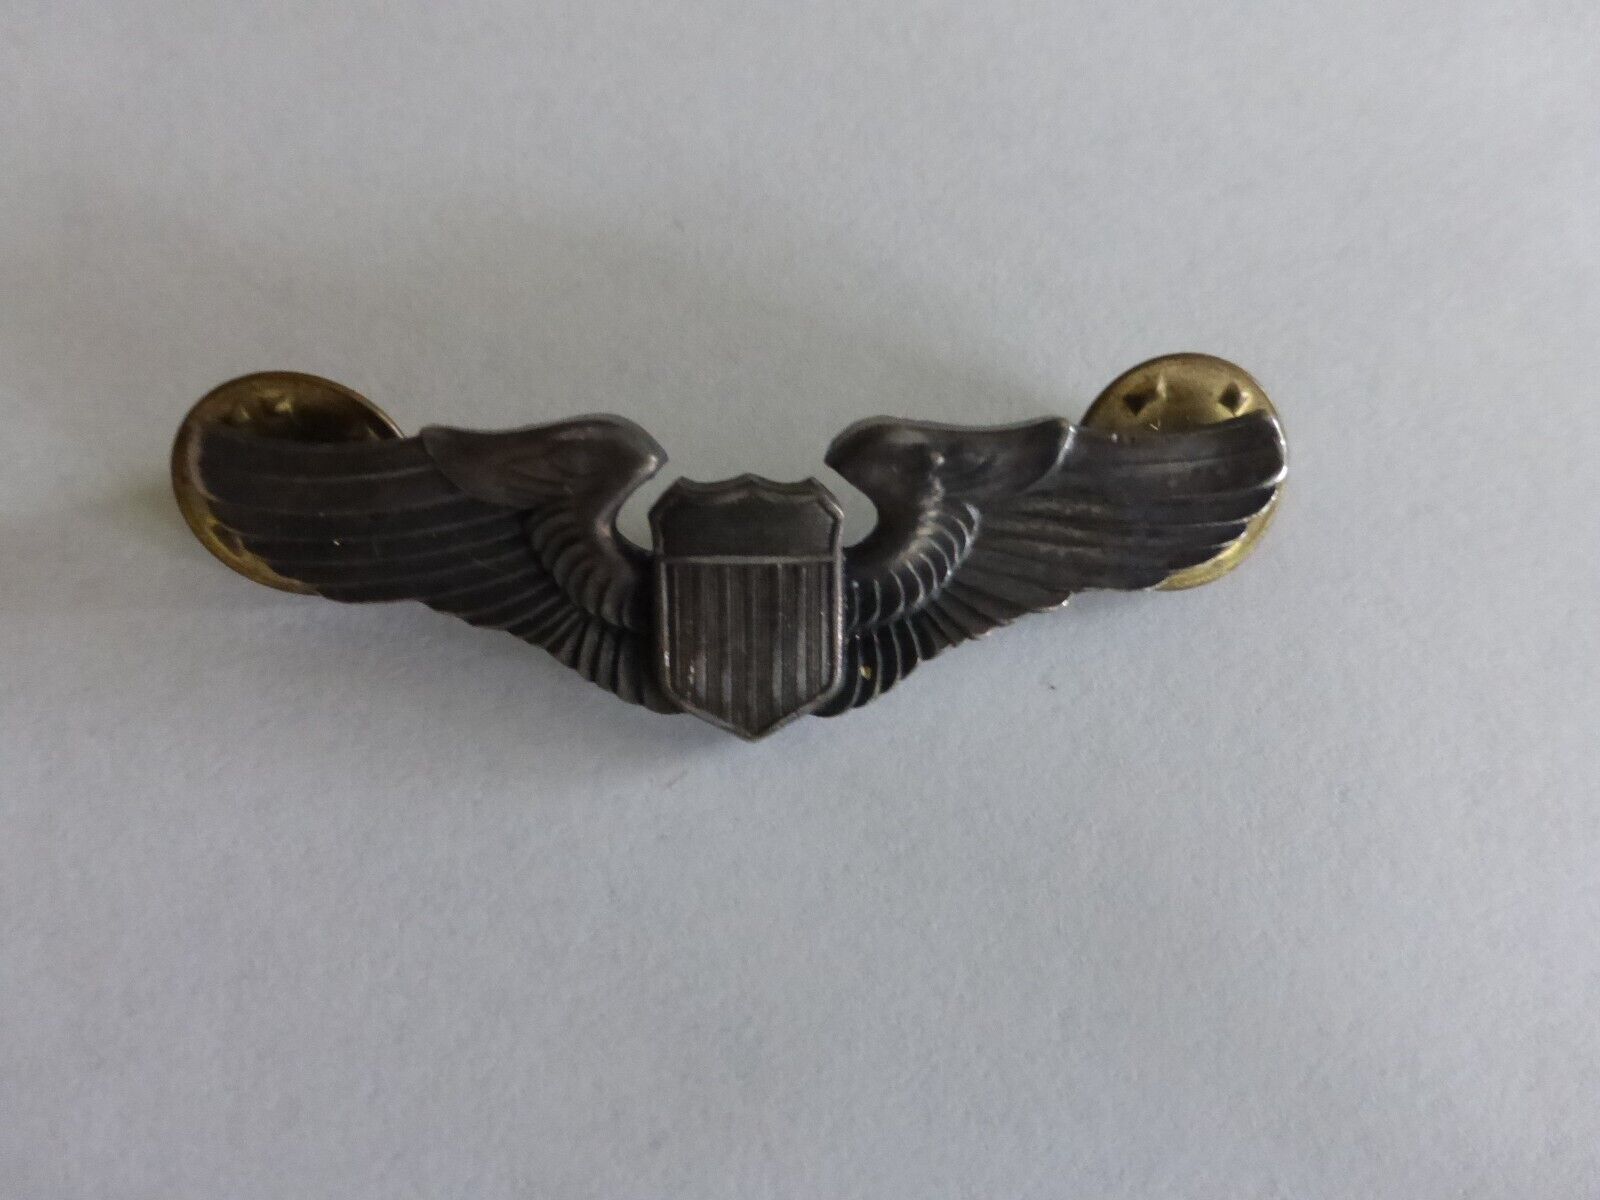 Vintage WW2 US Army Air Corps/Air Force Sterling Silver Pilot Wings Pin